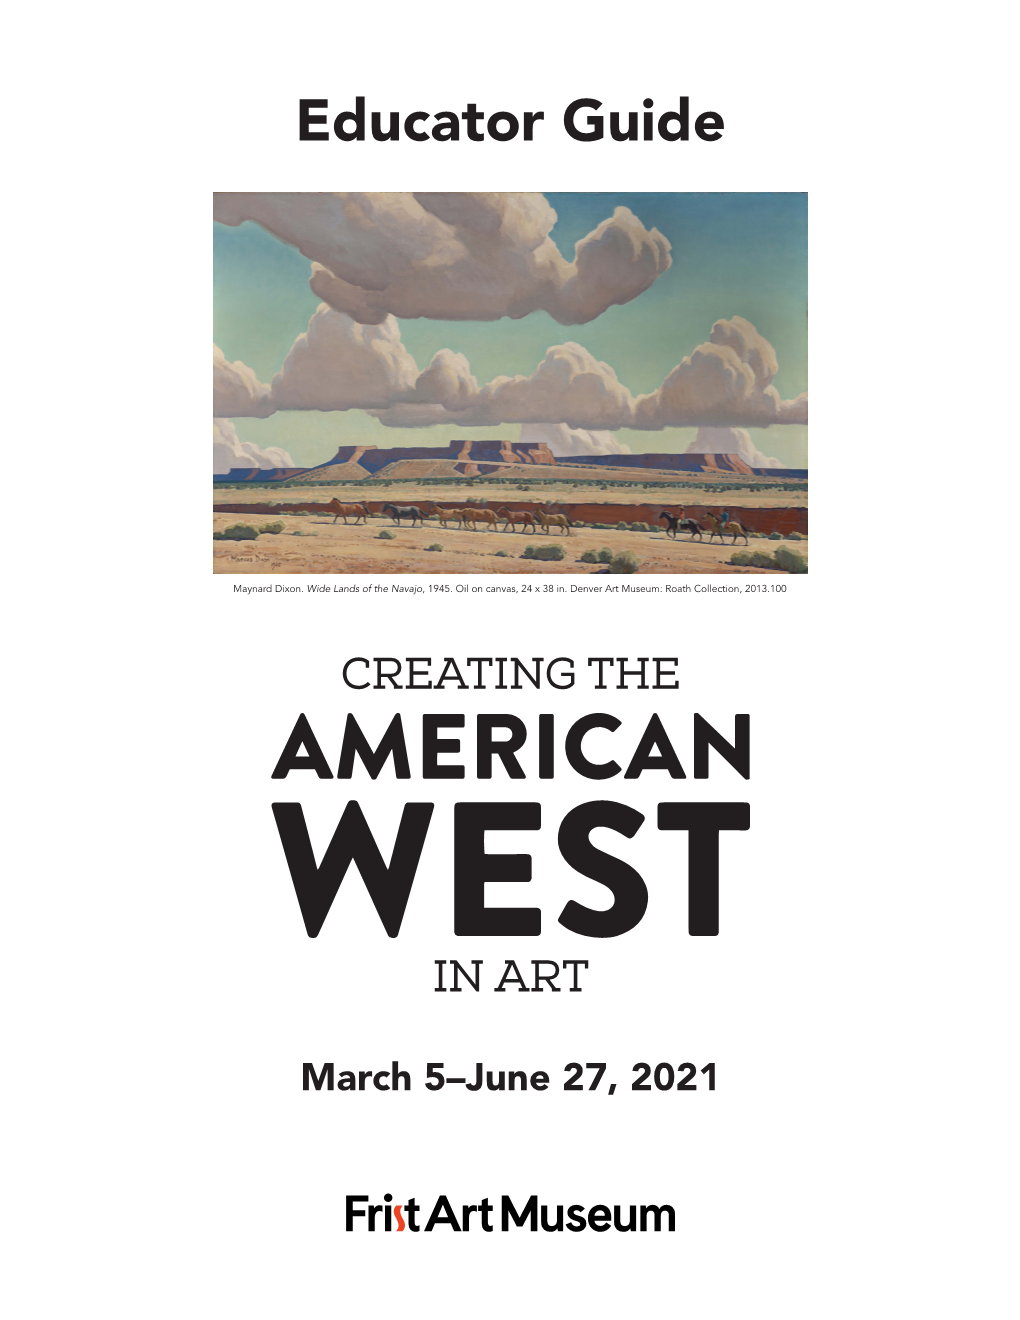 Educator Guide Creating the American West In